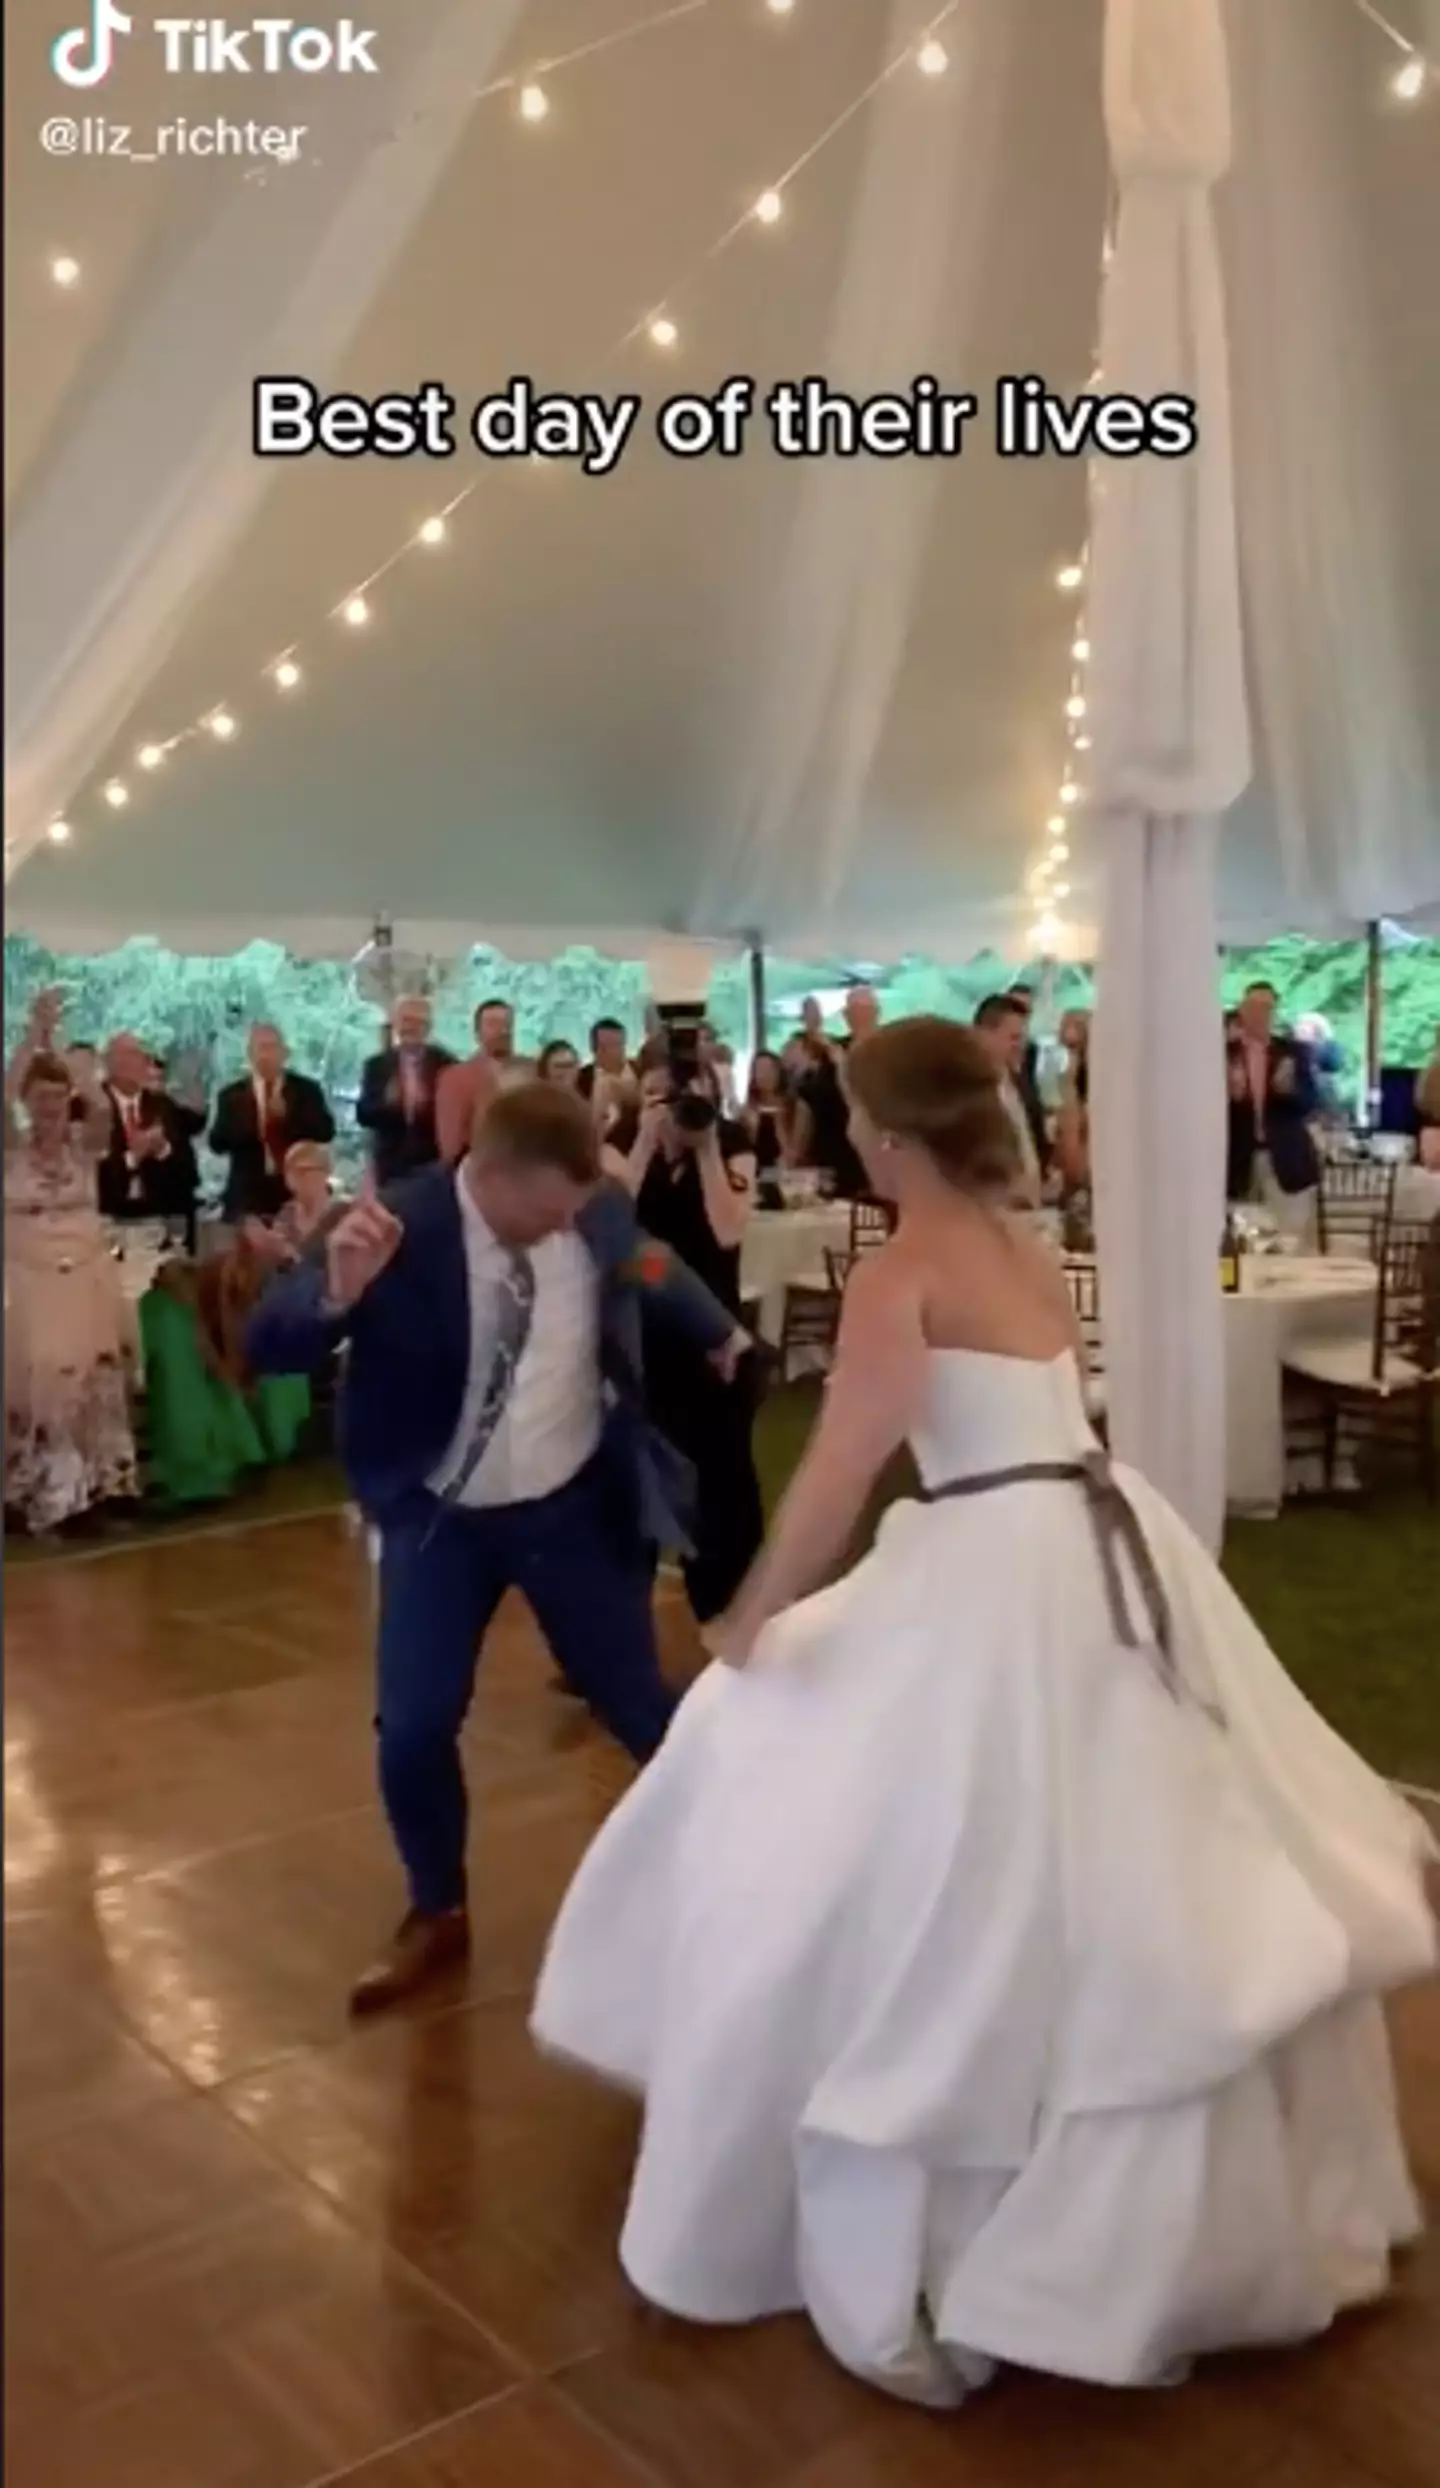 The pair danced excitedly at the wedding (